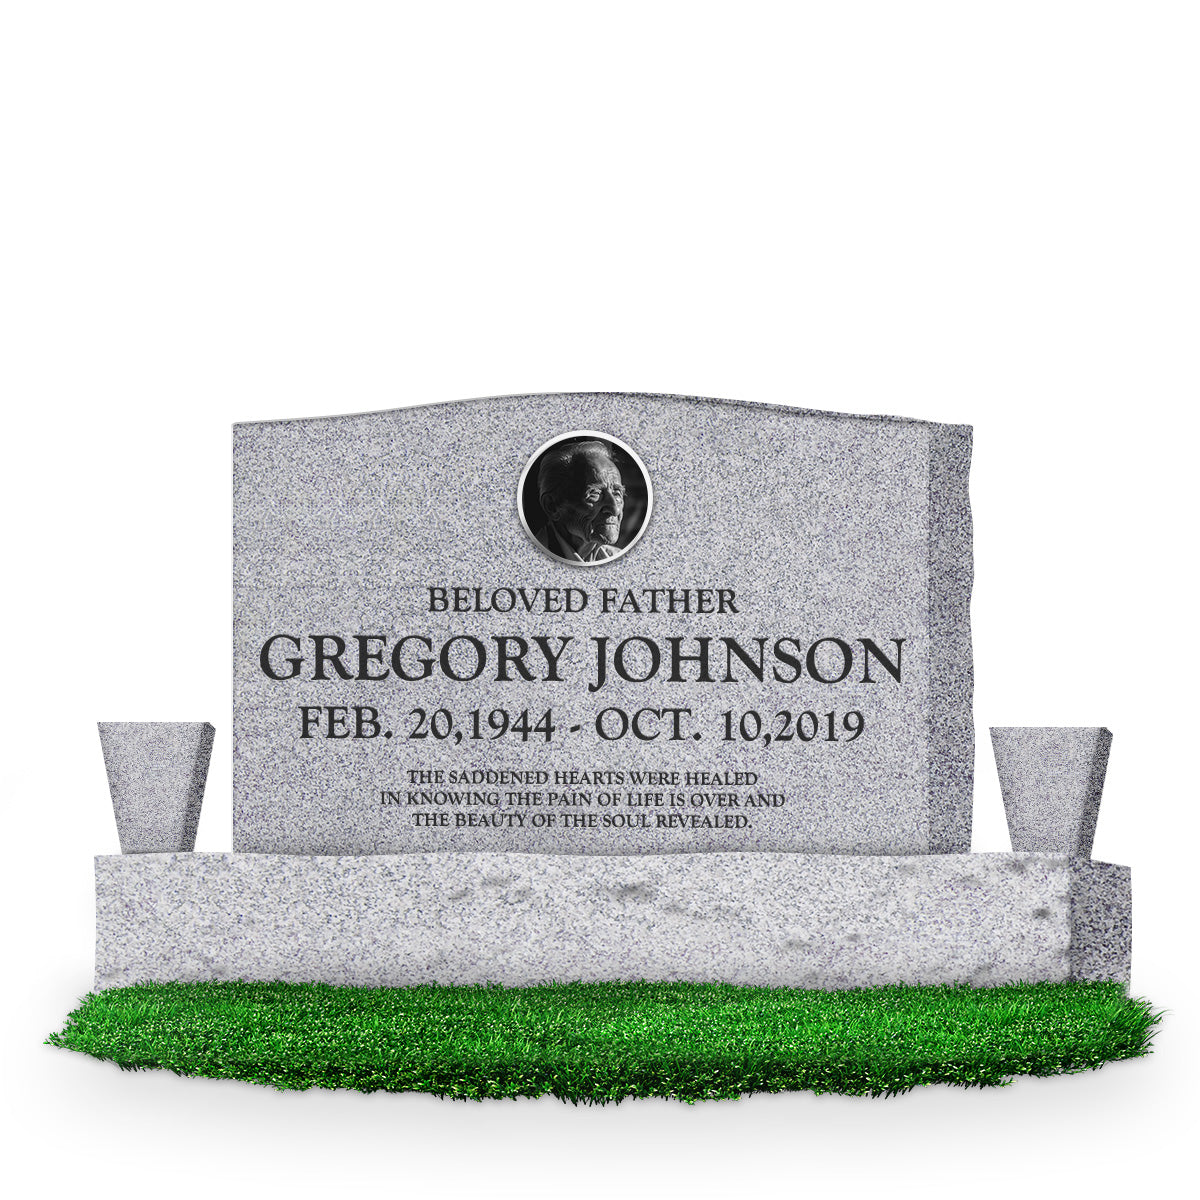 36″ x 6″ x 24″ Serp Top Upright Headstone: polished front and back; 60″ base; two square tapered bases; Single/Artwork